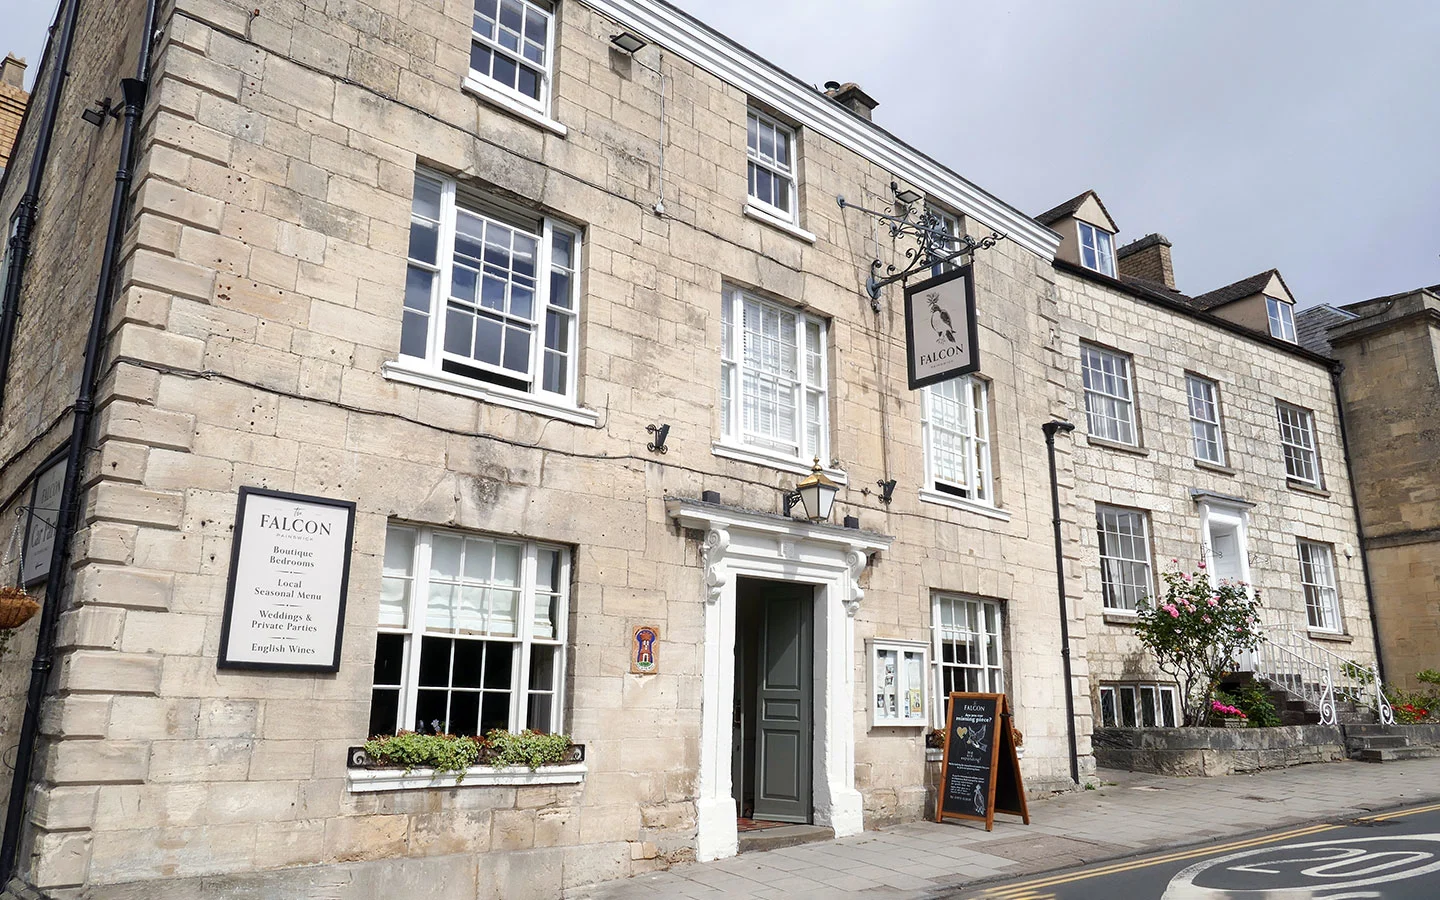 The Falcoln Inn, Cotswold Way accommodation in Painswick 